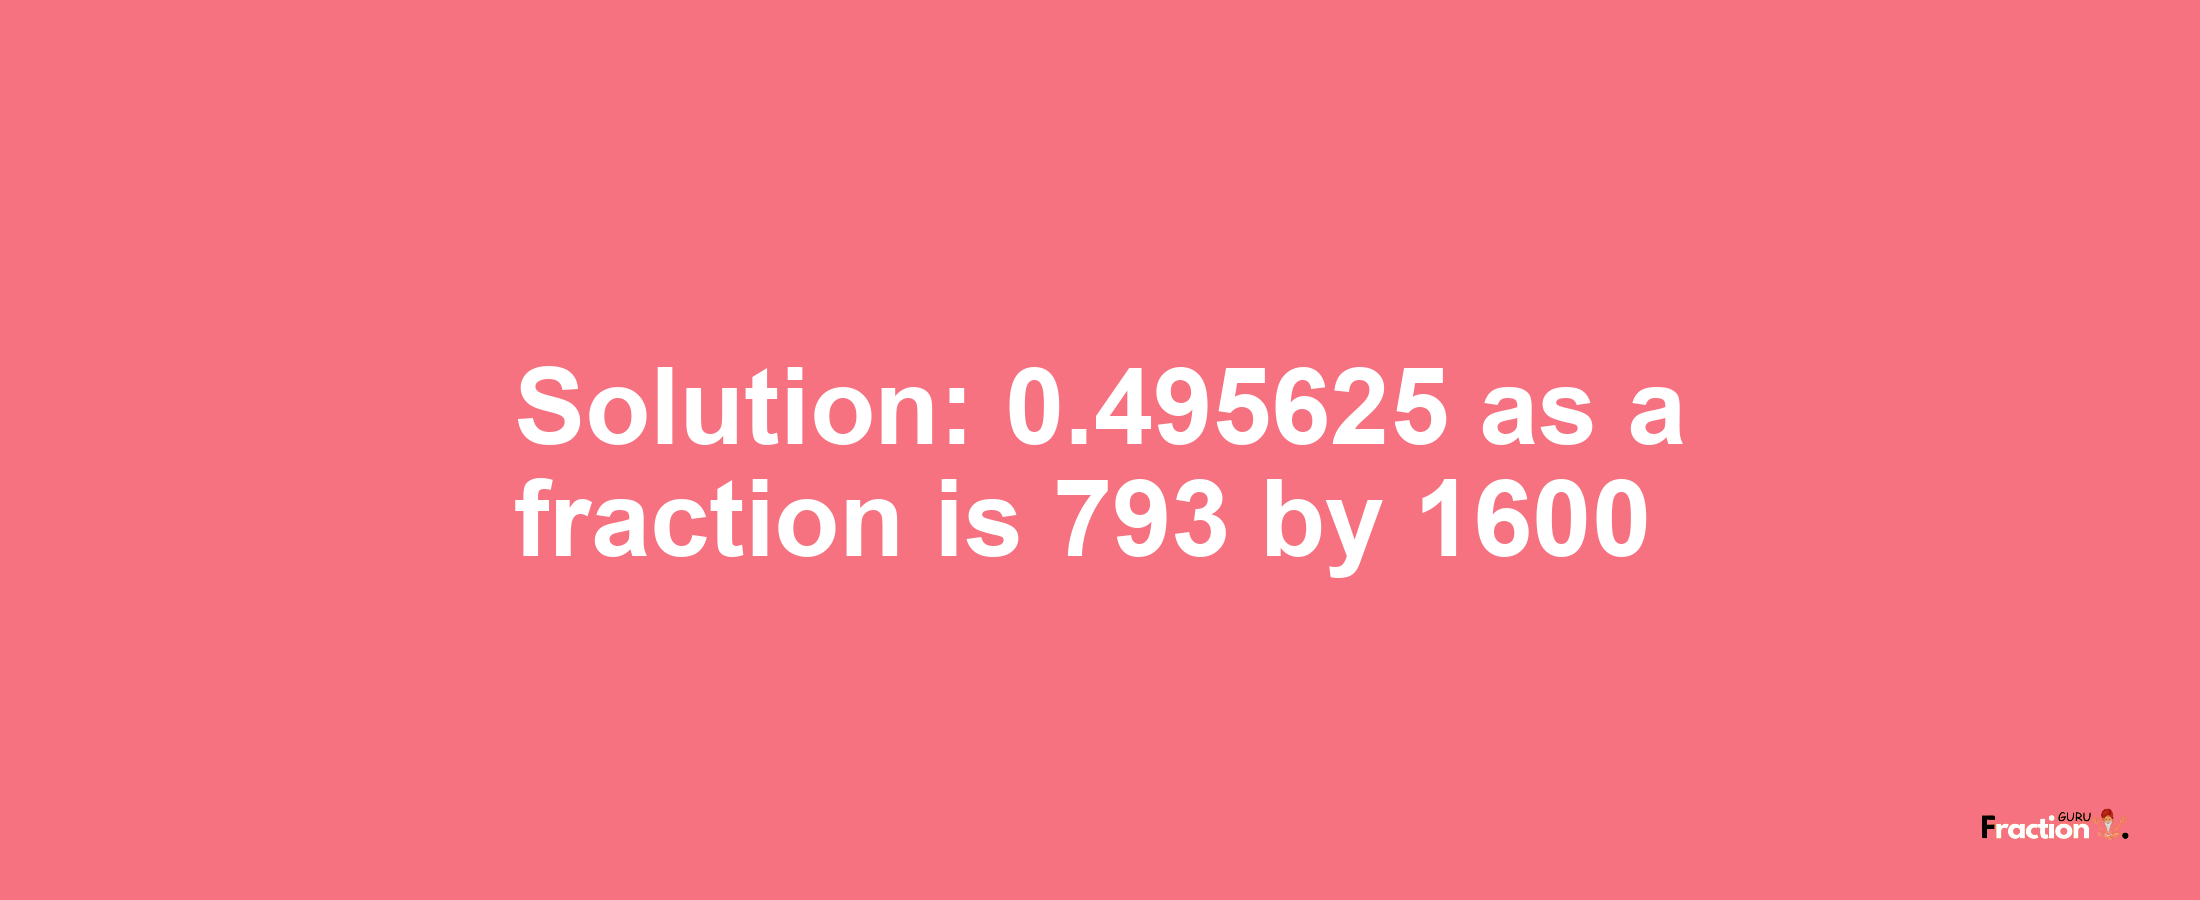 Solution:0.495625 as a fraction is 793/1600